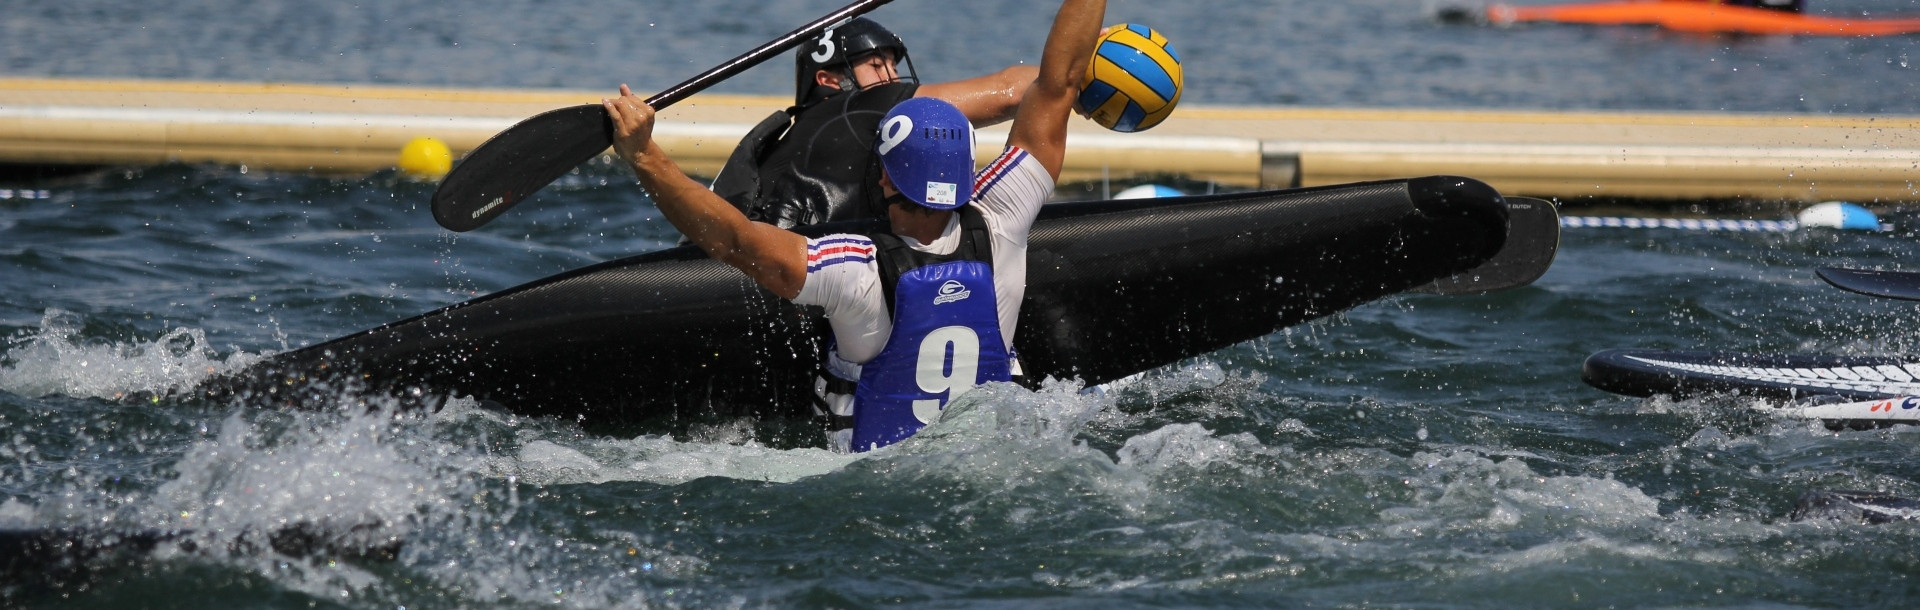 Germany show character with impressive wins at ICF Canoe Polo World Championships